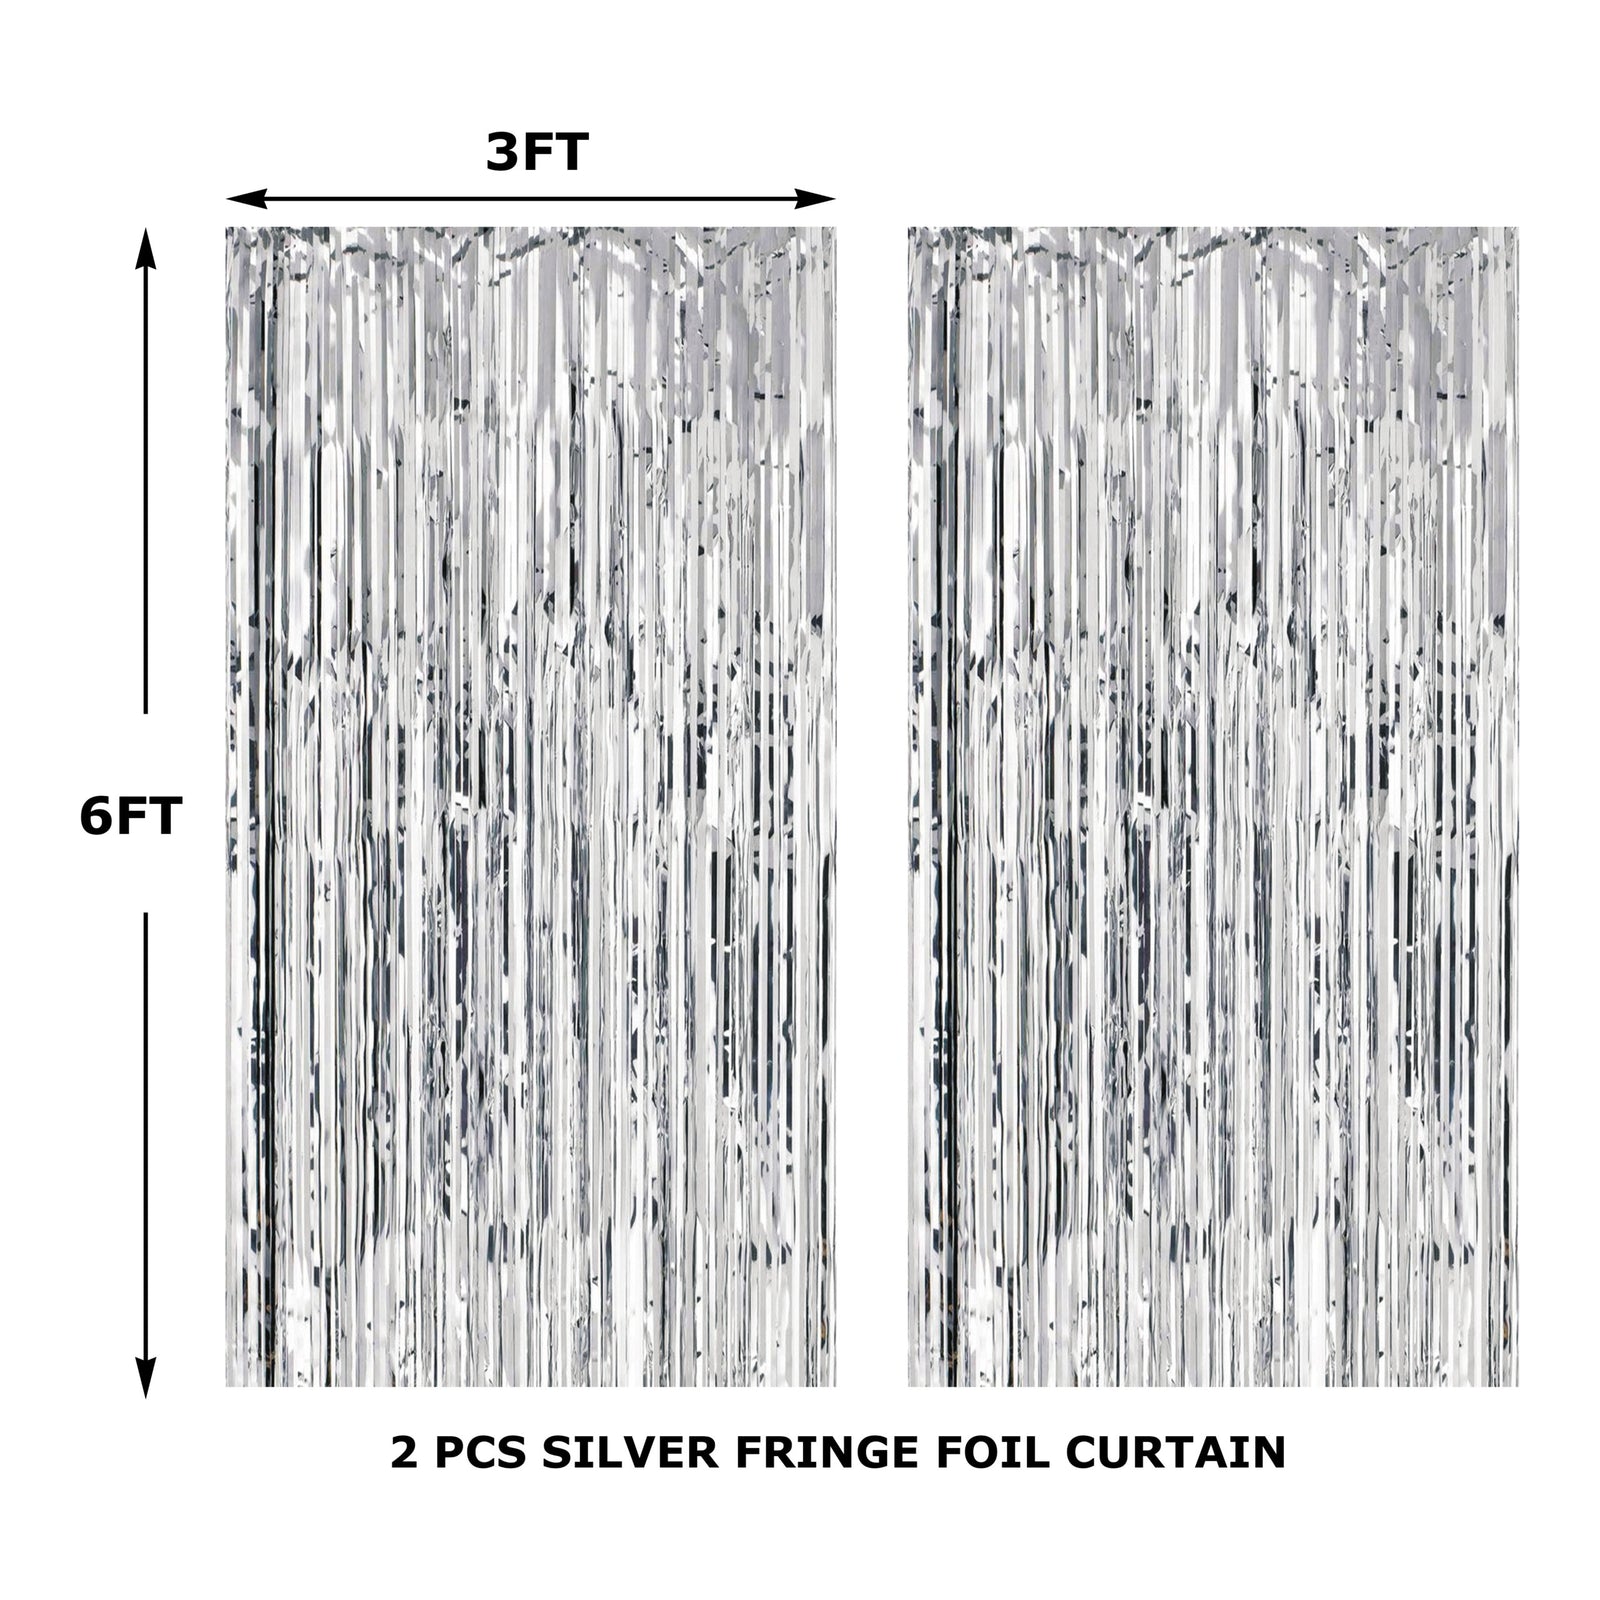 Metallic Silver Foil Fringe Curtains for Party Photo Backdrop Wedding Birthday Decor (2 Pack, Silver) – 3 X 6 ft